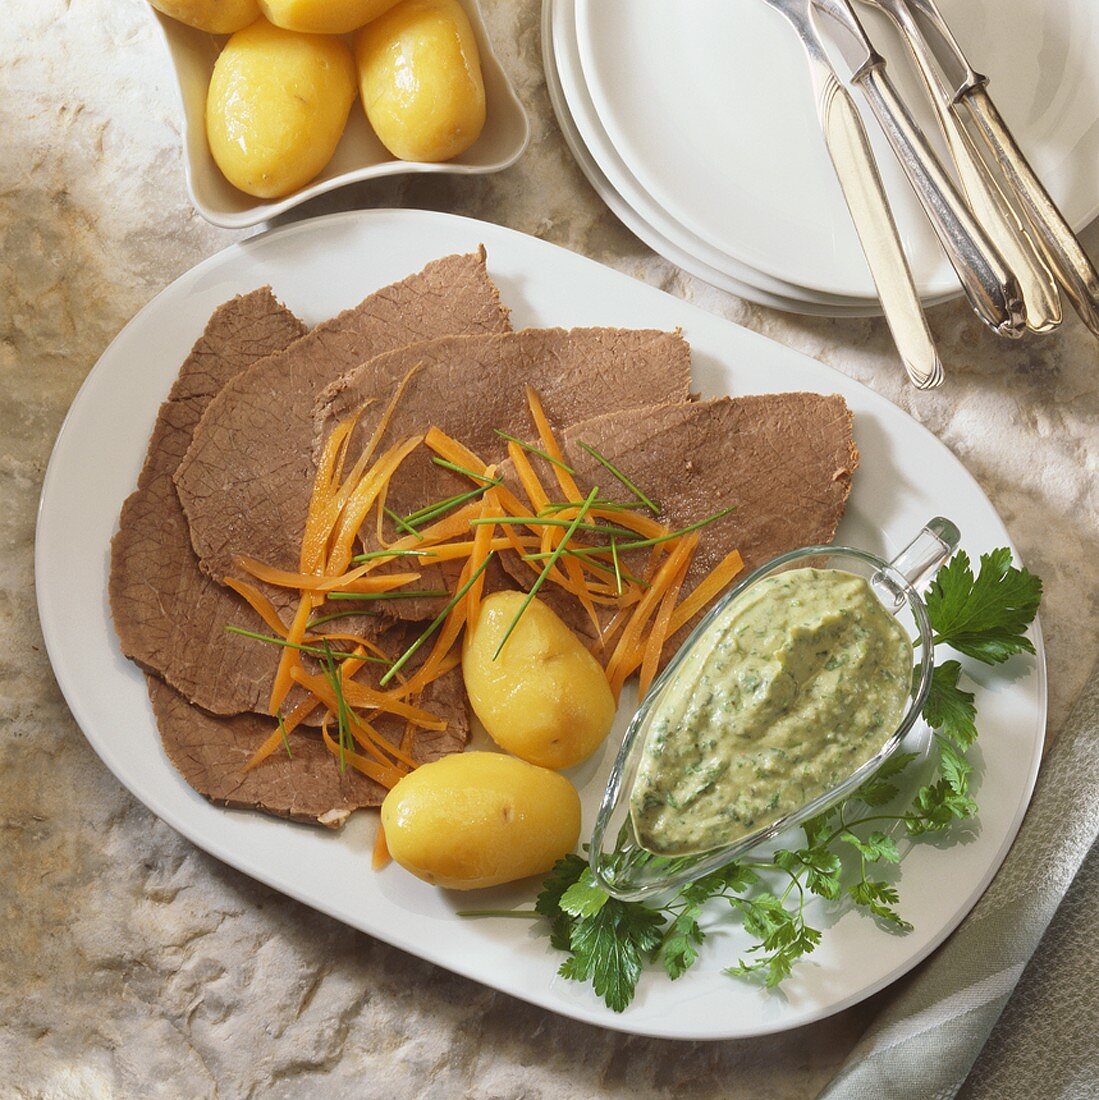 Boiled beef with carrots, potatoes and parsley & chervil sauce